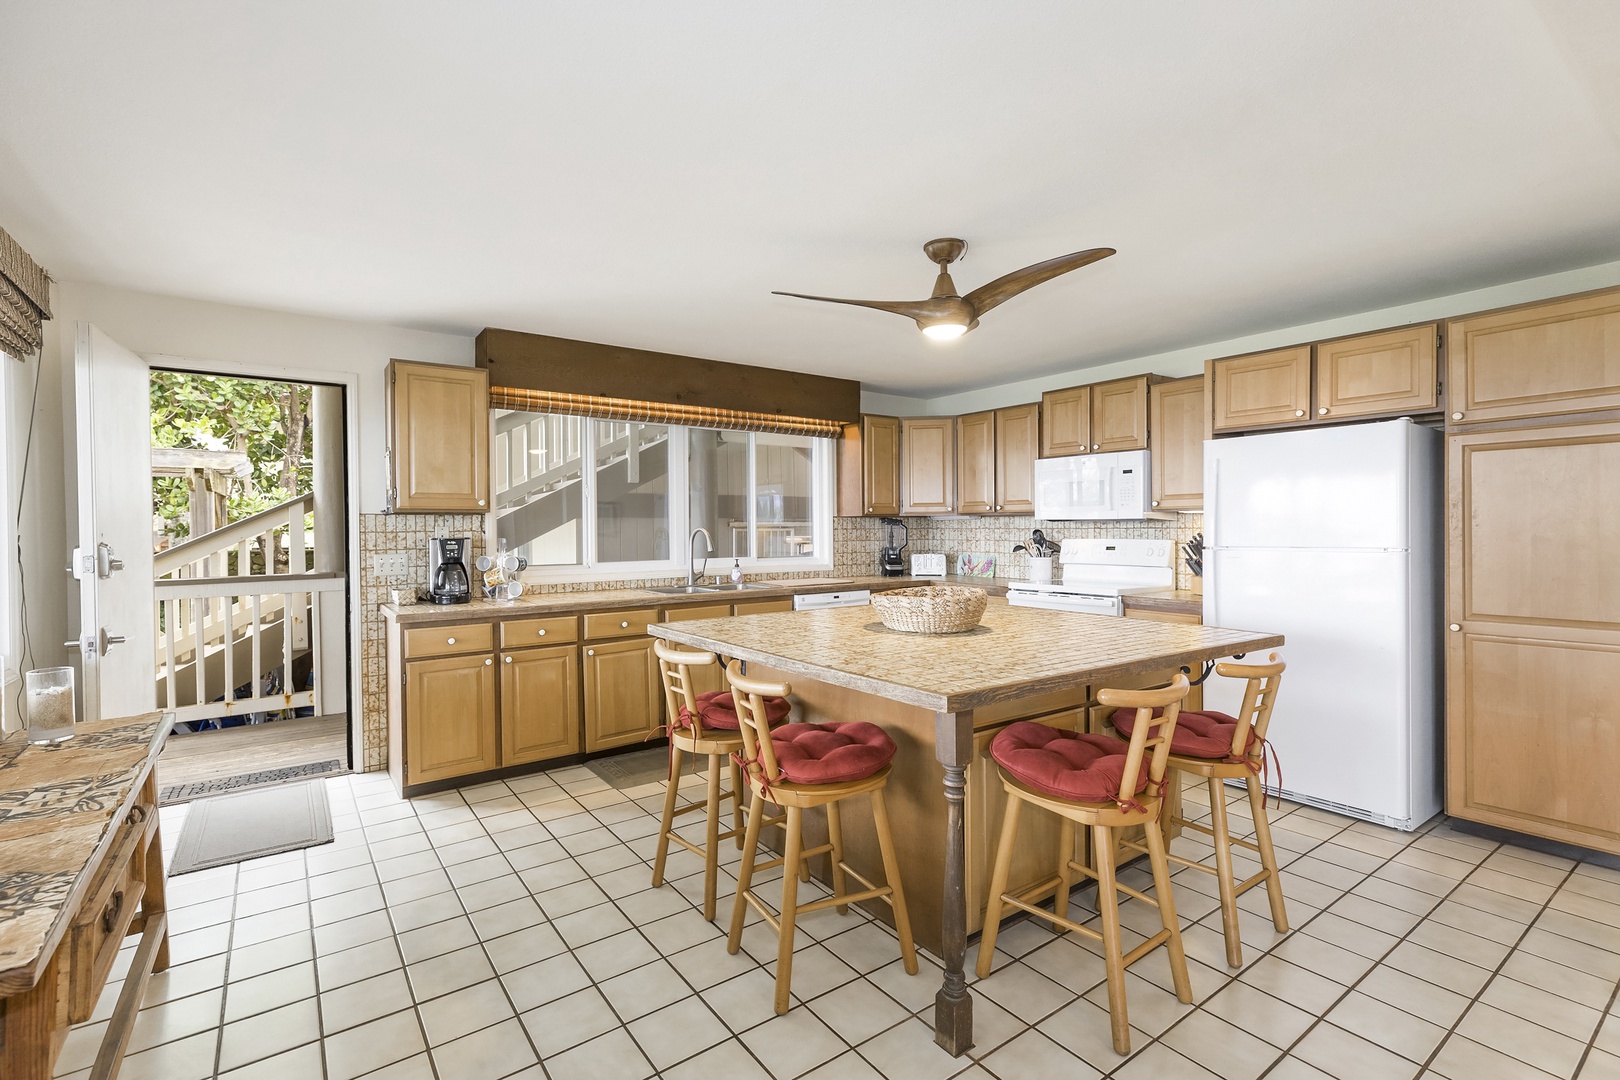 Haleiwa Vacation Rentals, Hale Kimo - The large kitchen island has seating for quick meals or visiting with the 'chef'